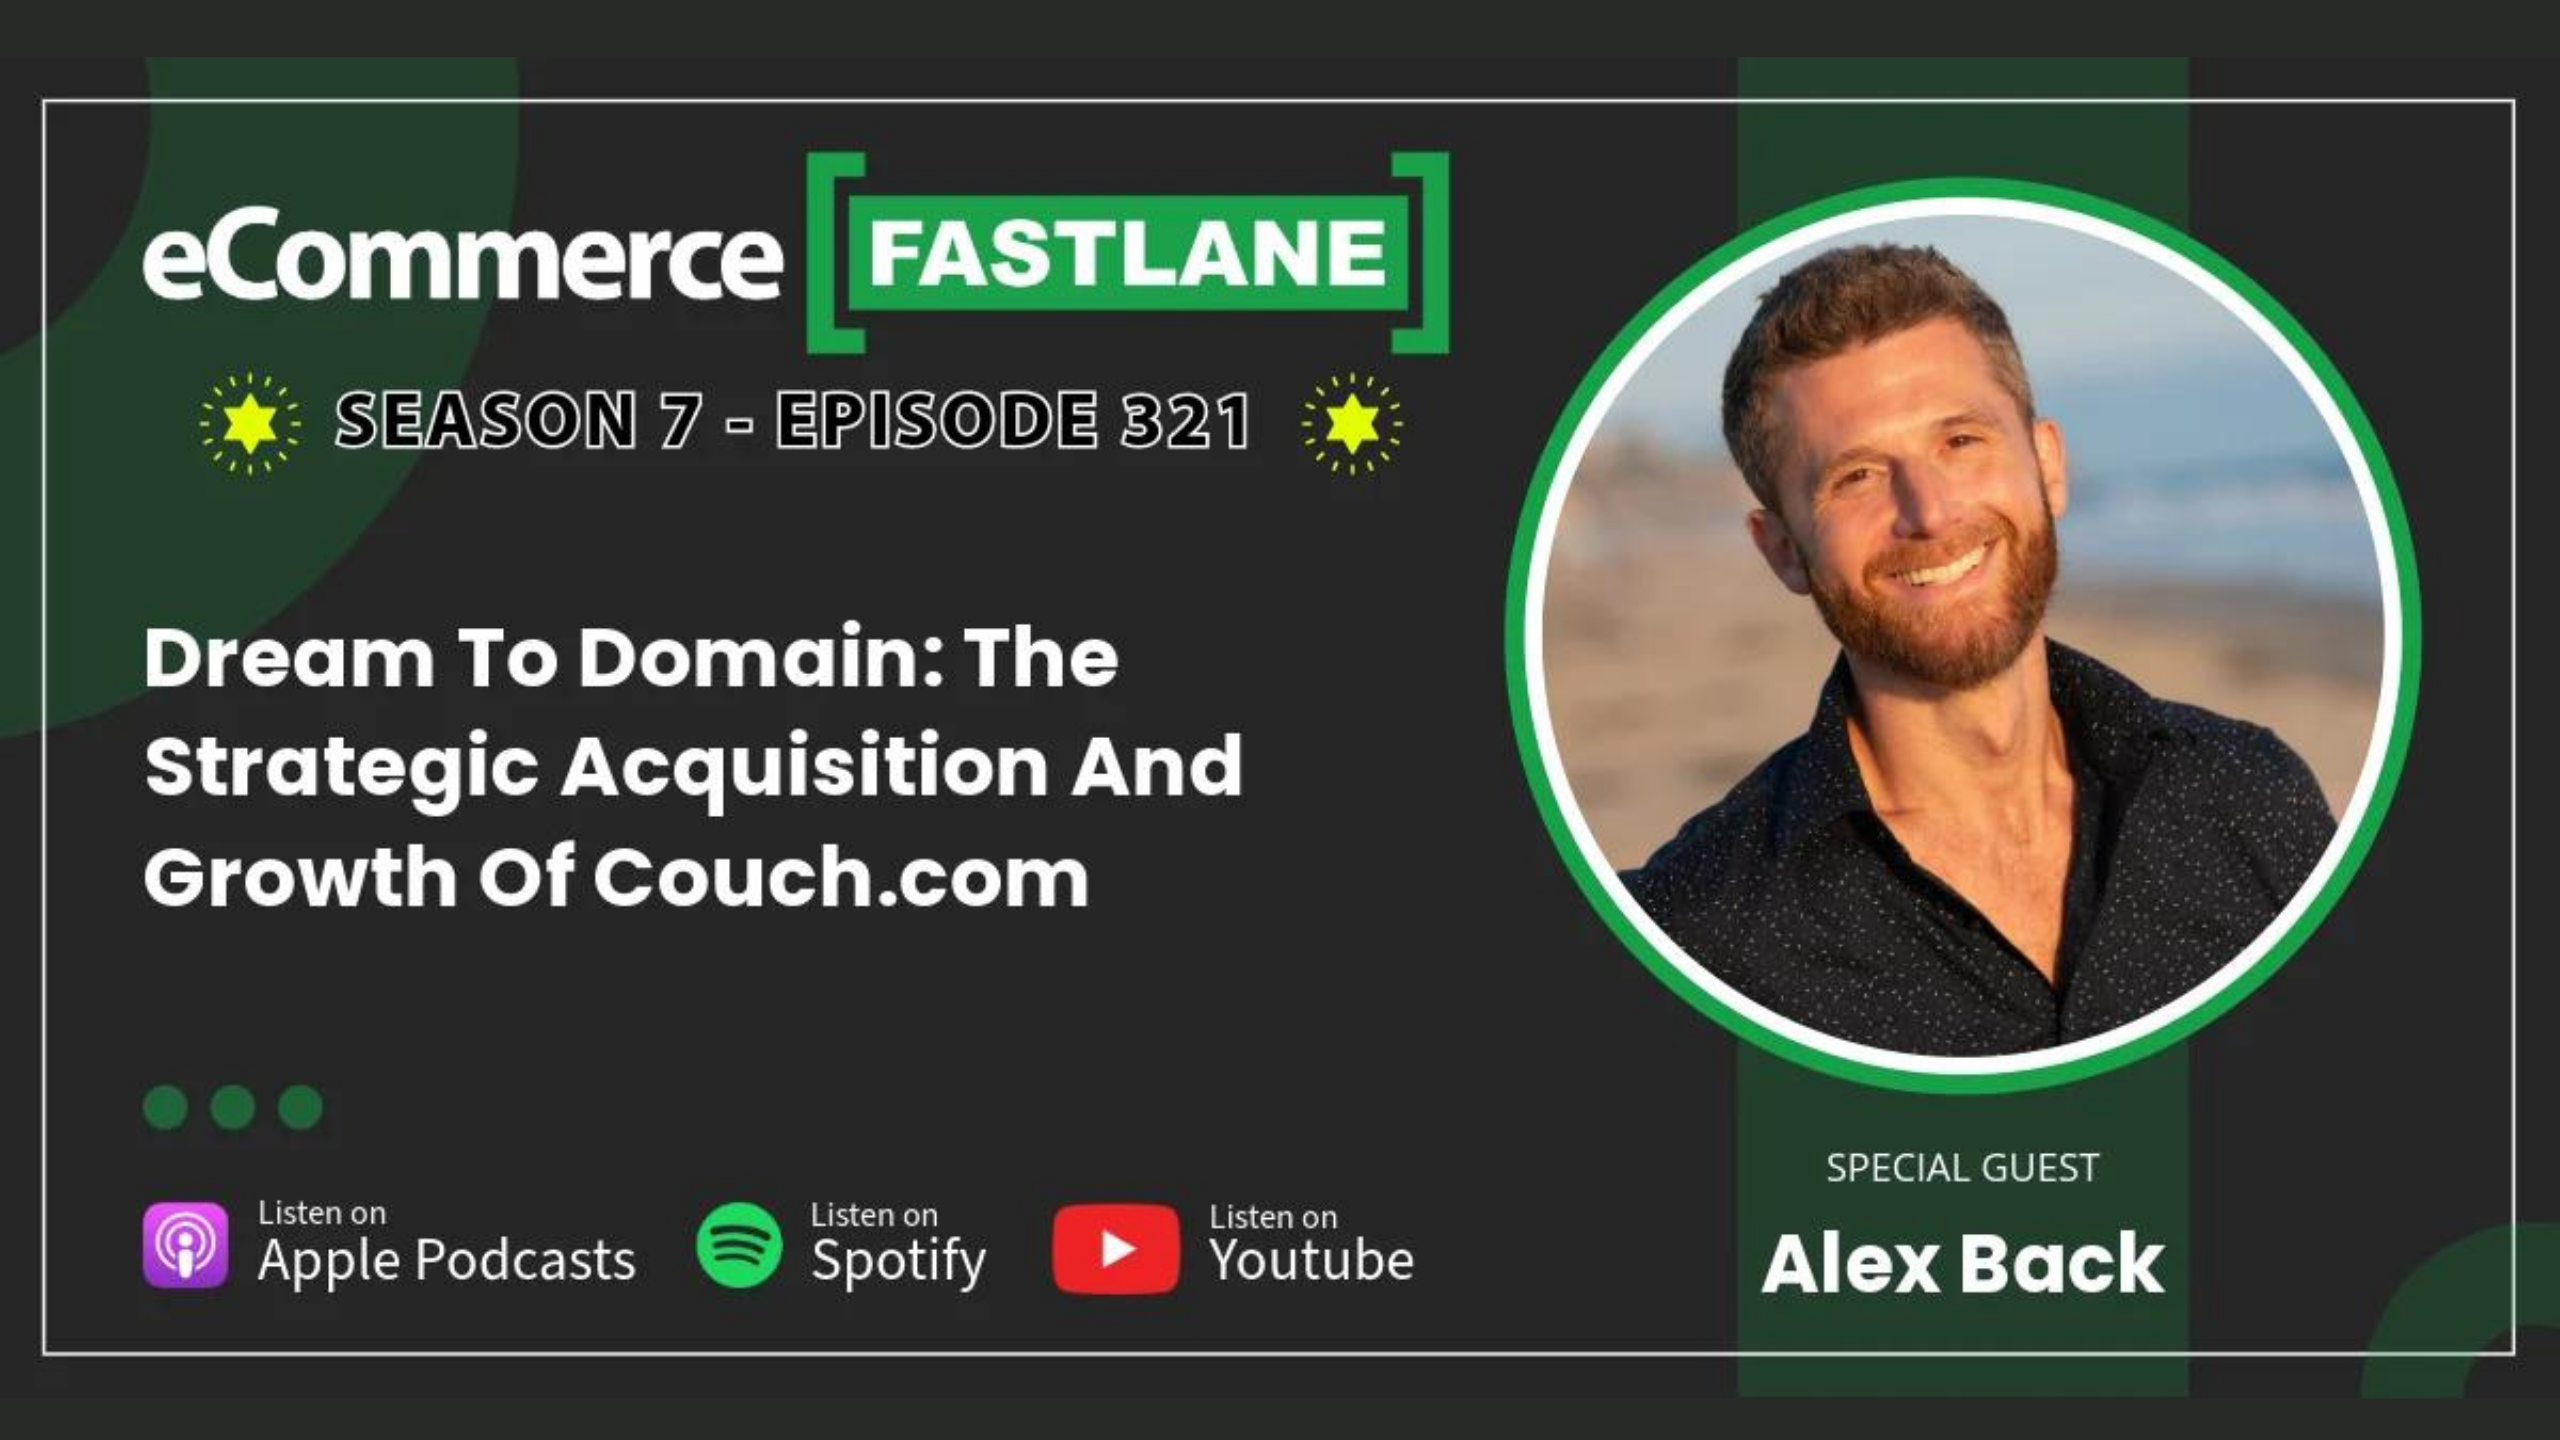 A promotional image for the podcast "eCommerce Fastlane," Season 7, Episode 321 titled "Dream To Domain: The Strategic Acquisition And Growth Of Couch.com." It features a photo of guest Alex Back and logos for Apple Podcasts, Spotify, and YouTube.